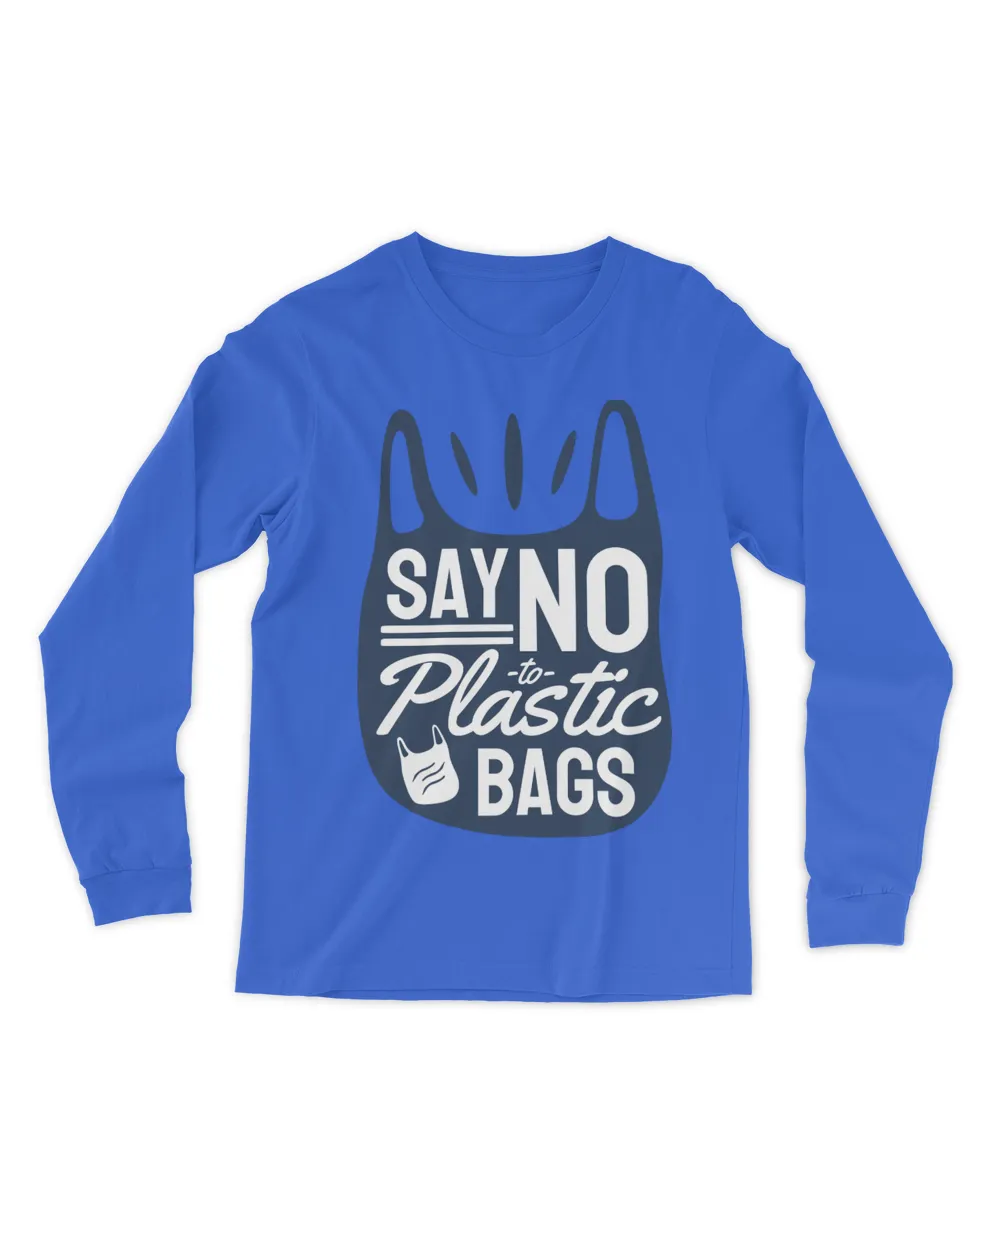 Say No To Plastic Bags (Earth Day Slogan T-Shirt)